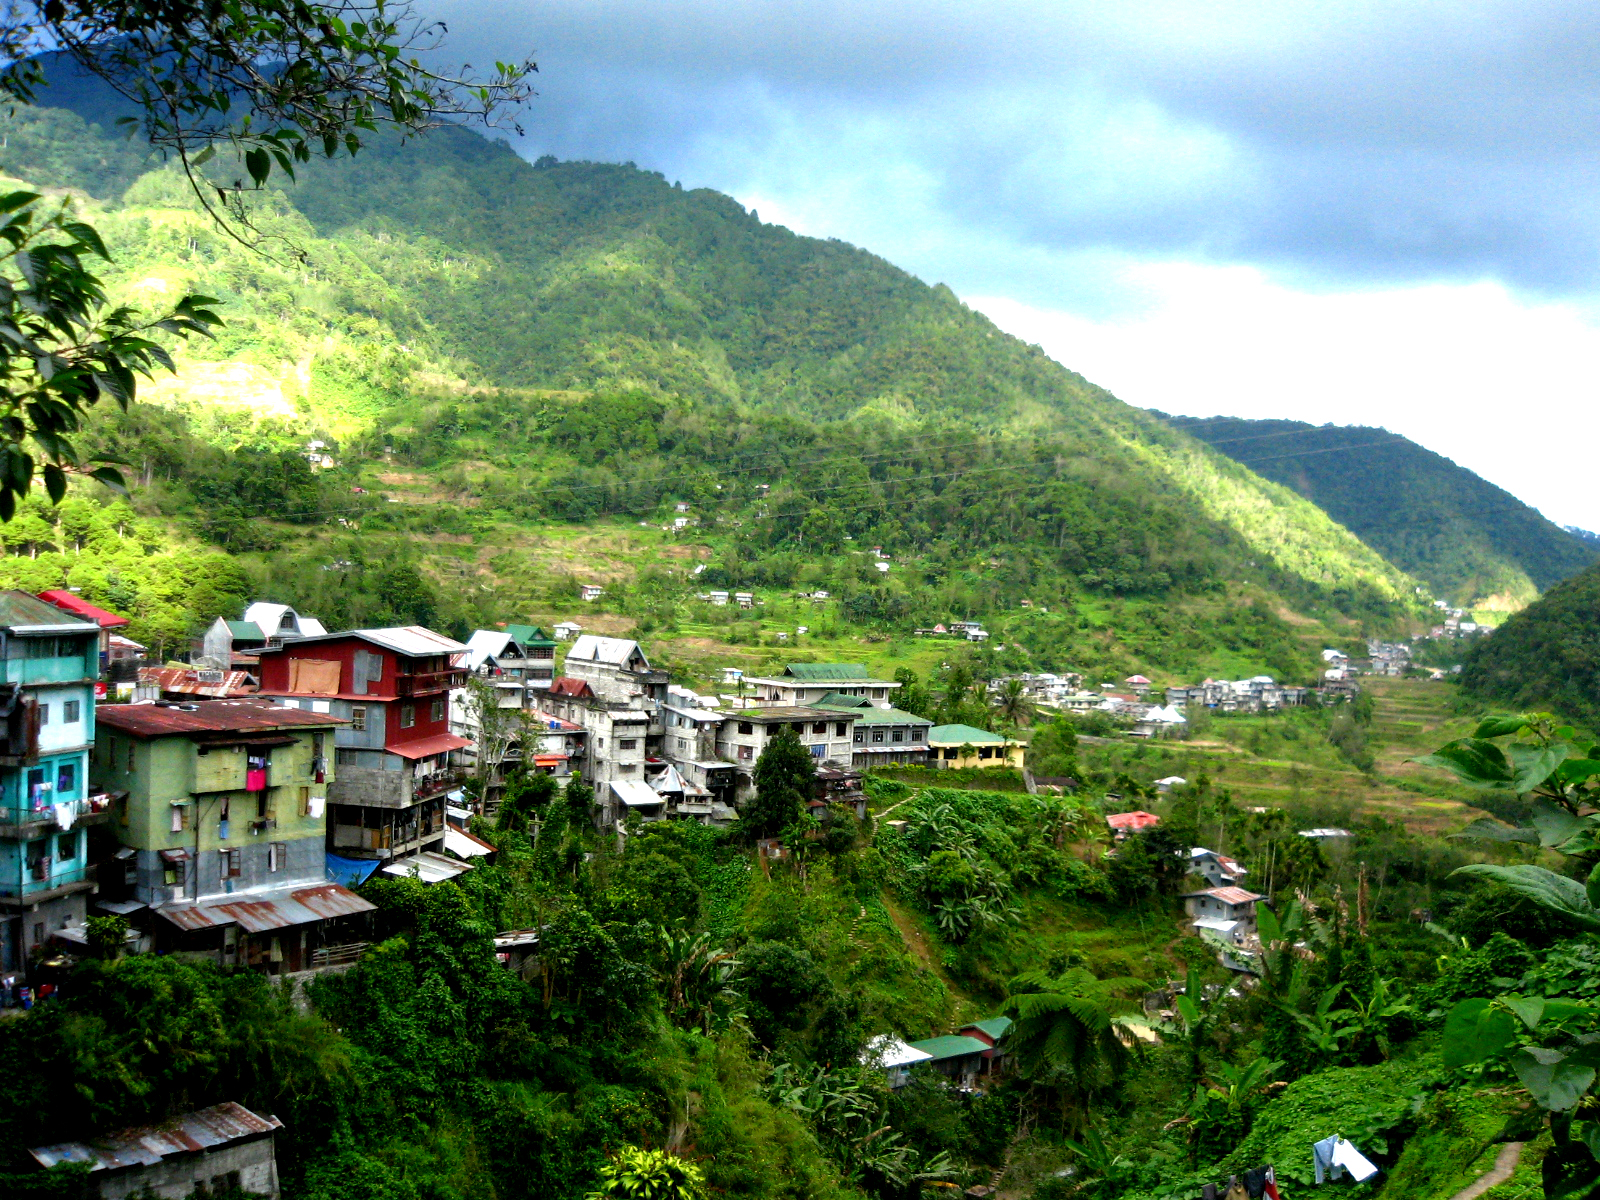 the mountainside is covered by houses and houses